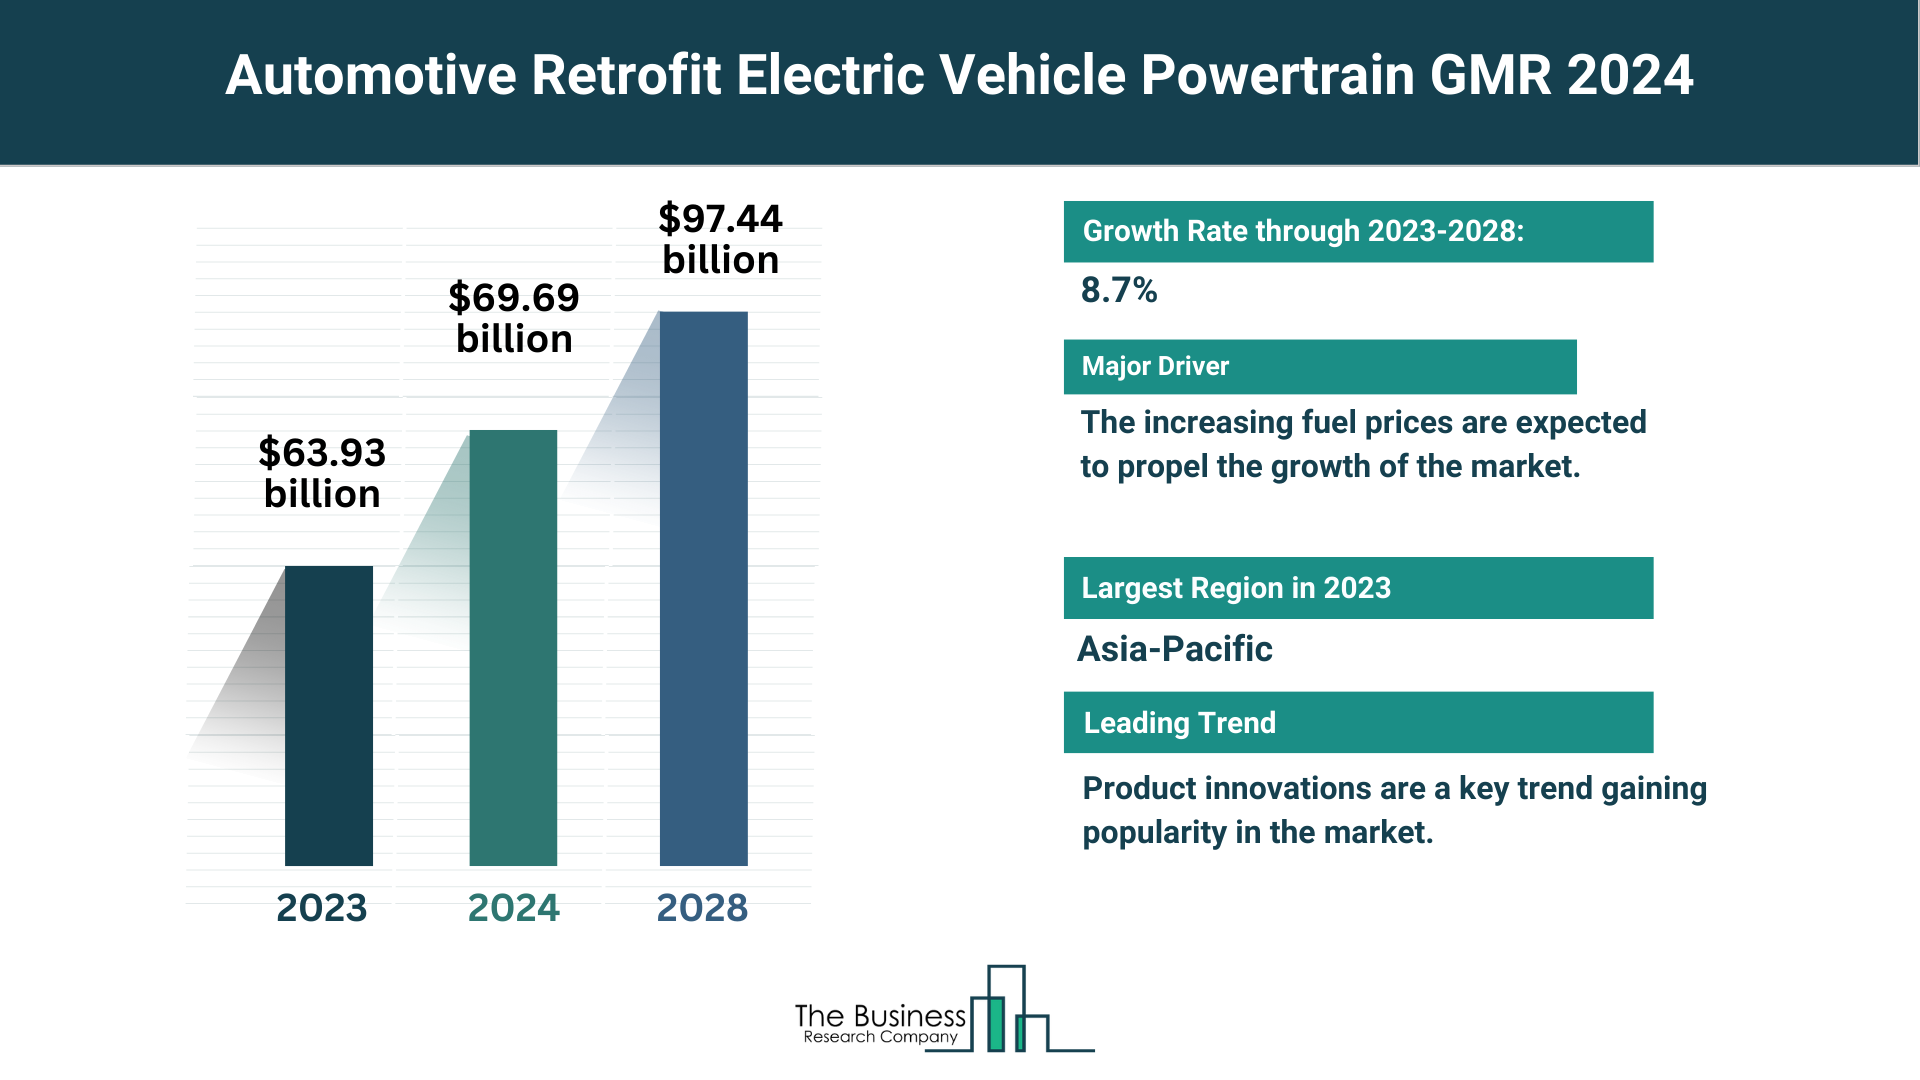 Global Automotive Retrofit Electric Vehicle Powertrain Market Analysis: Size, Drivers, Trends, Opportunities And Strategies